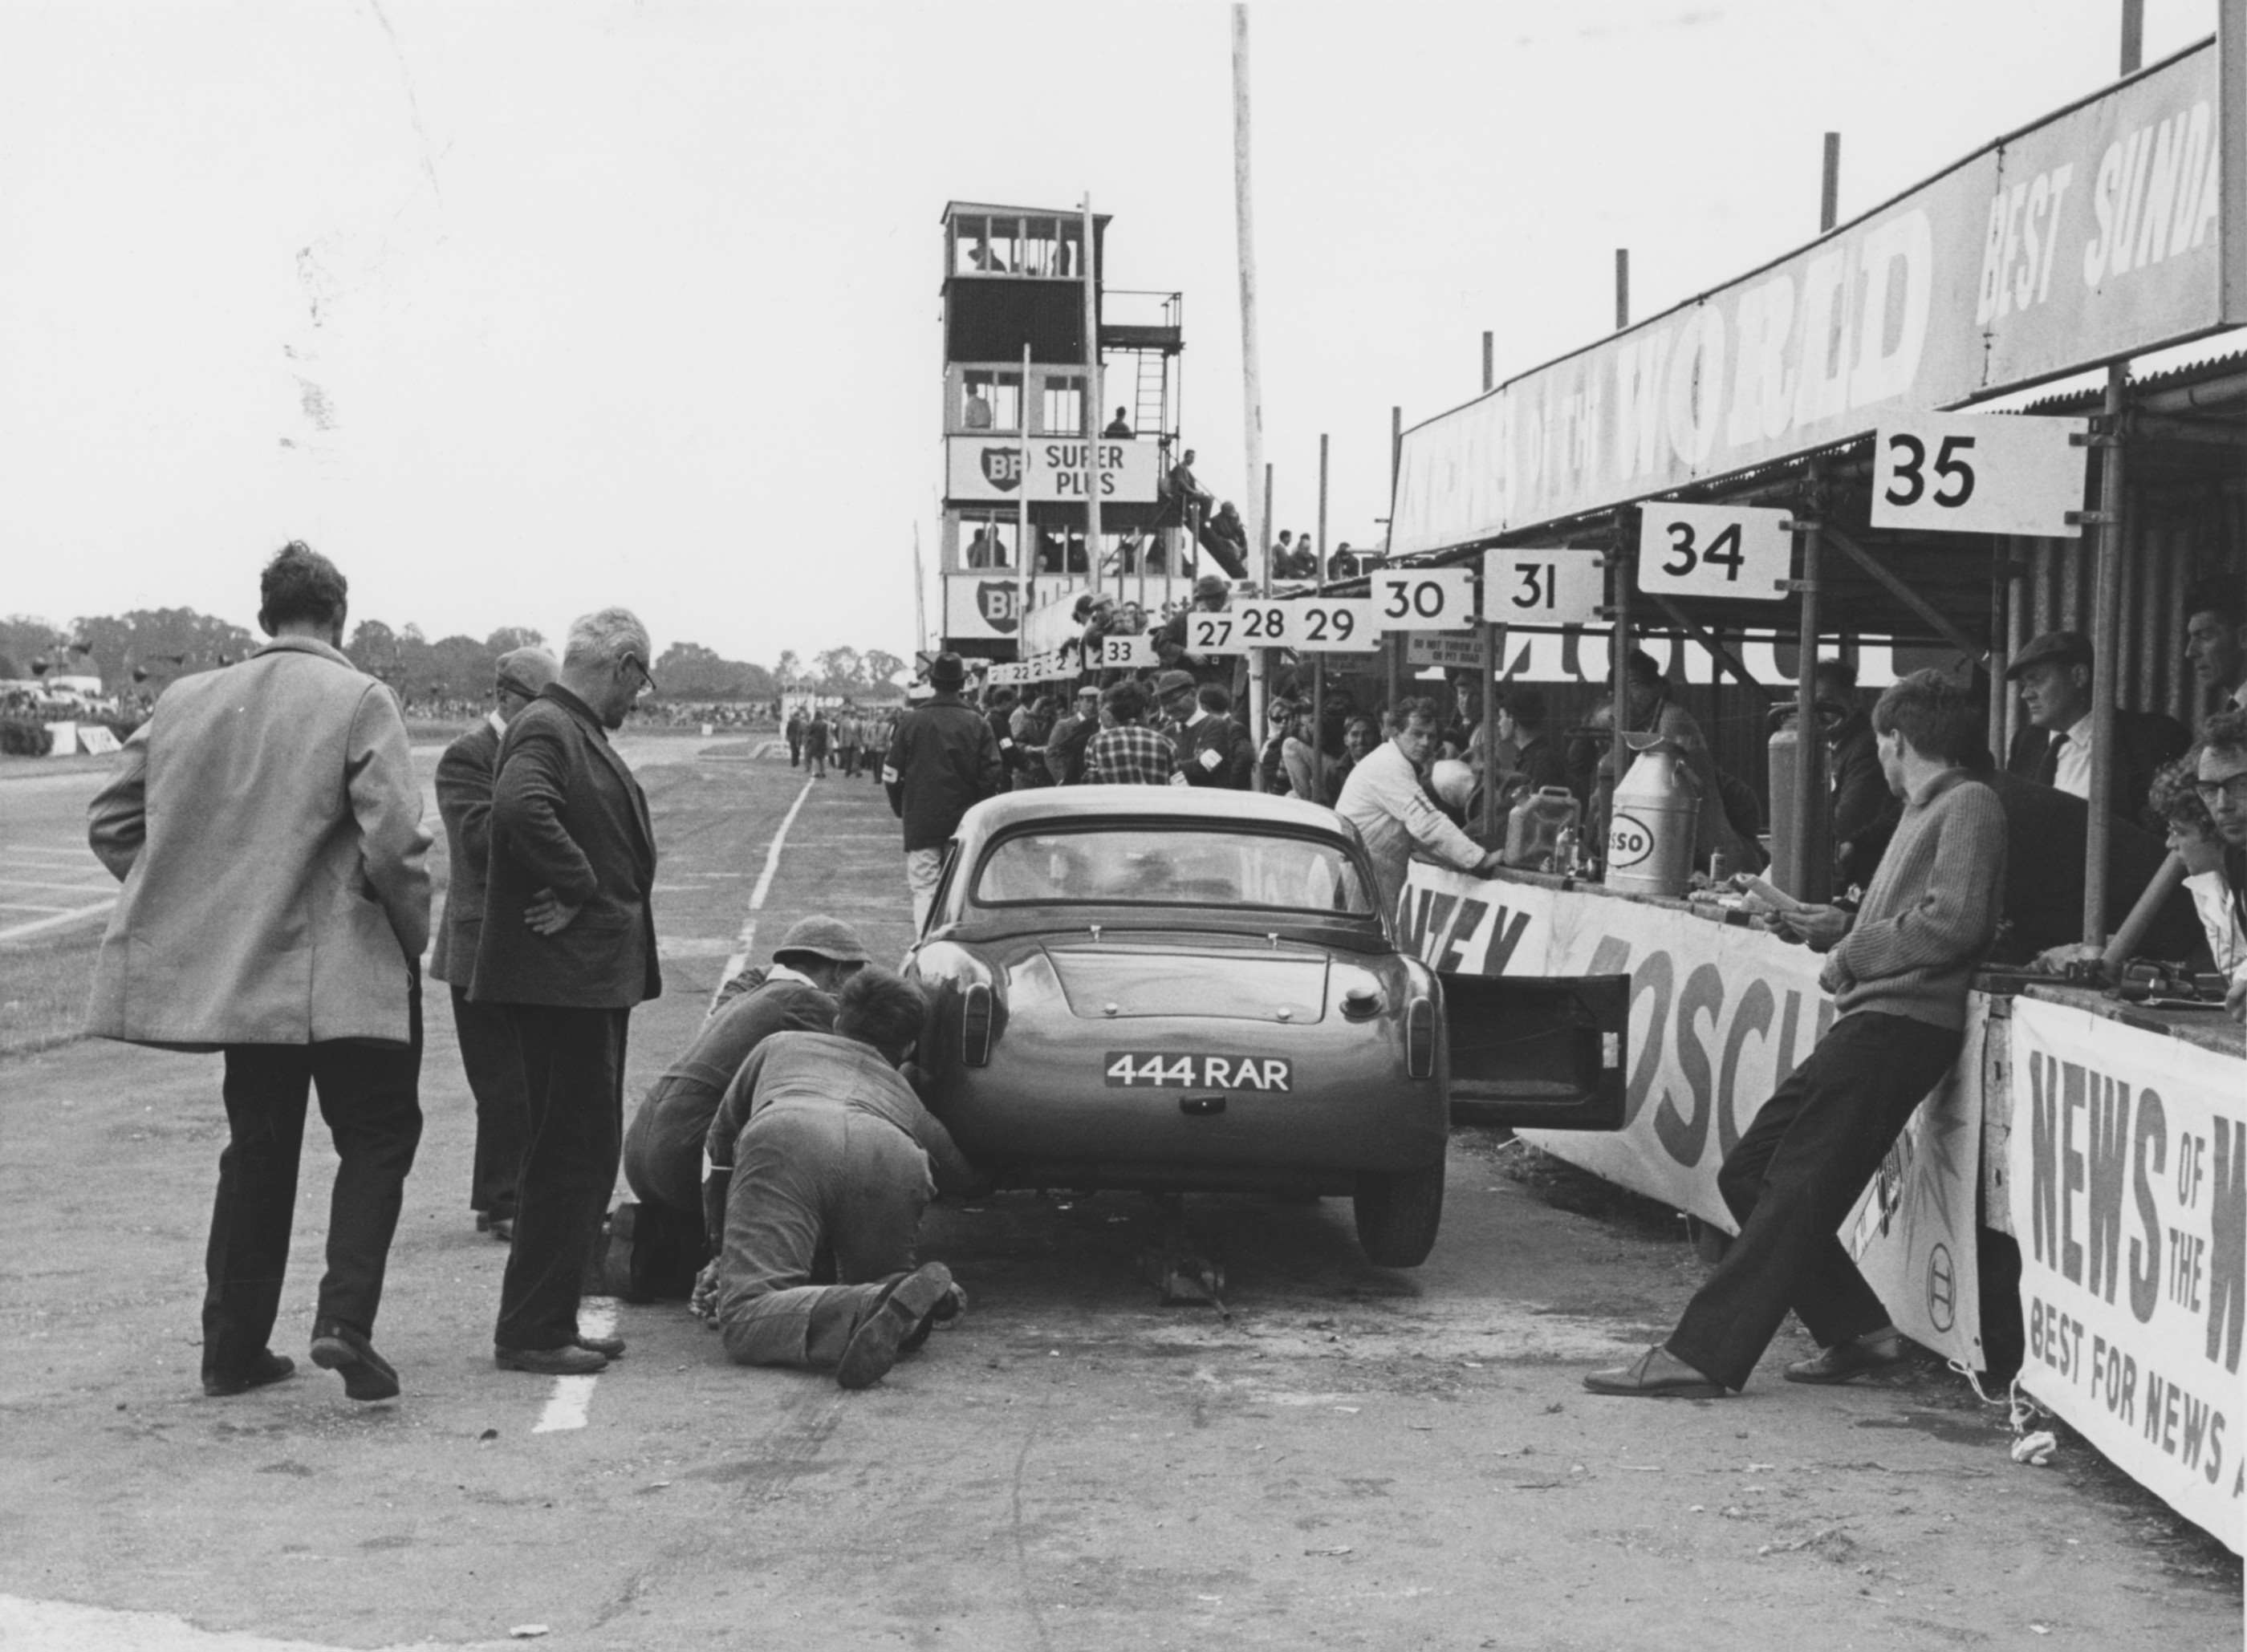 TT Turner in the Goodwood pits early 1960s - the commentary tower beyond with its contemporary stairs and ladders proving useful…